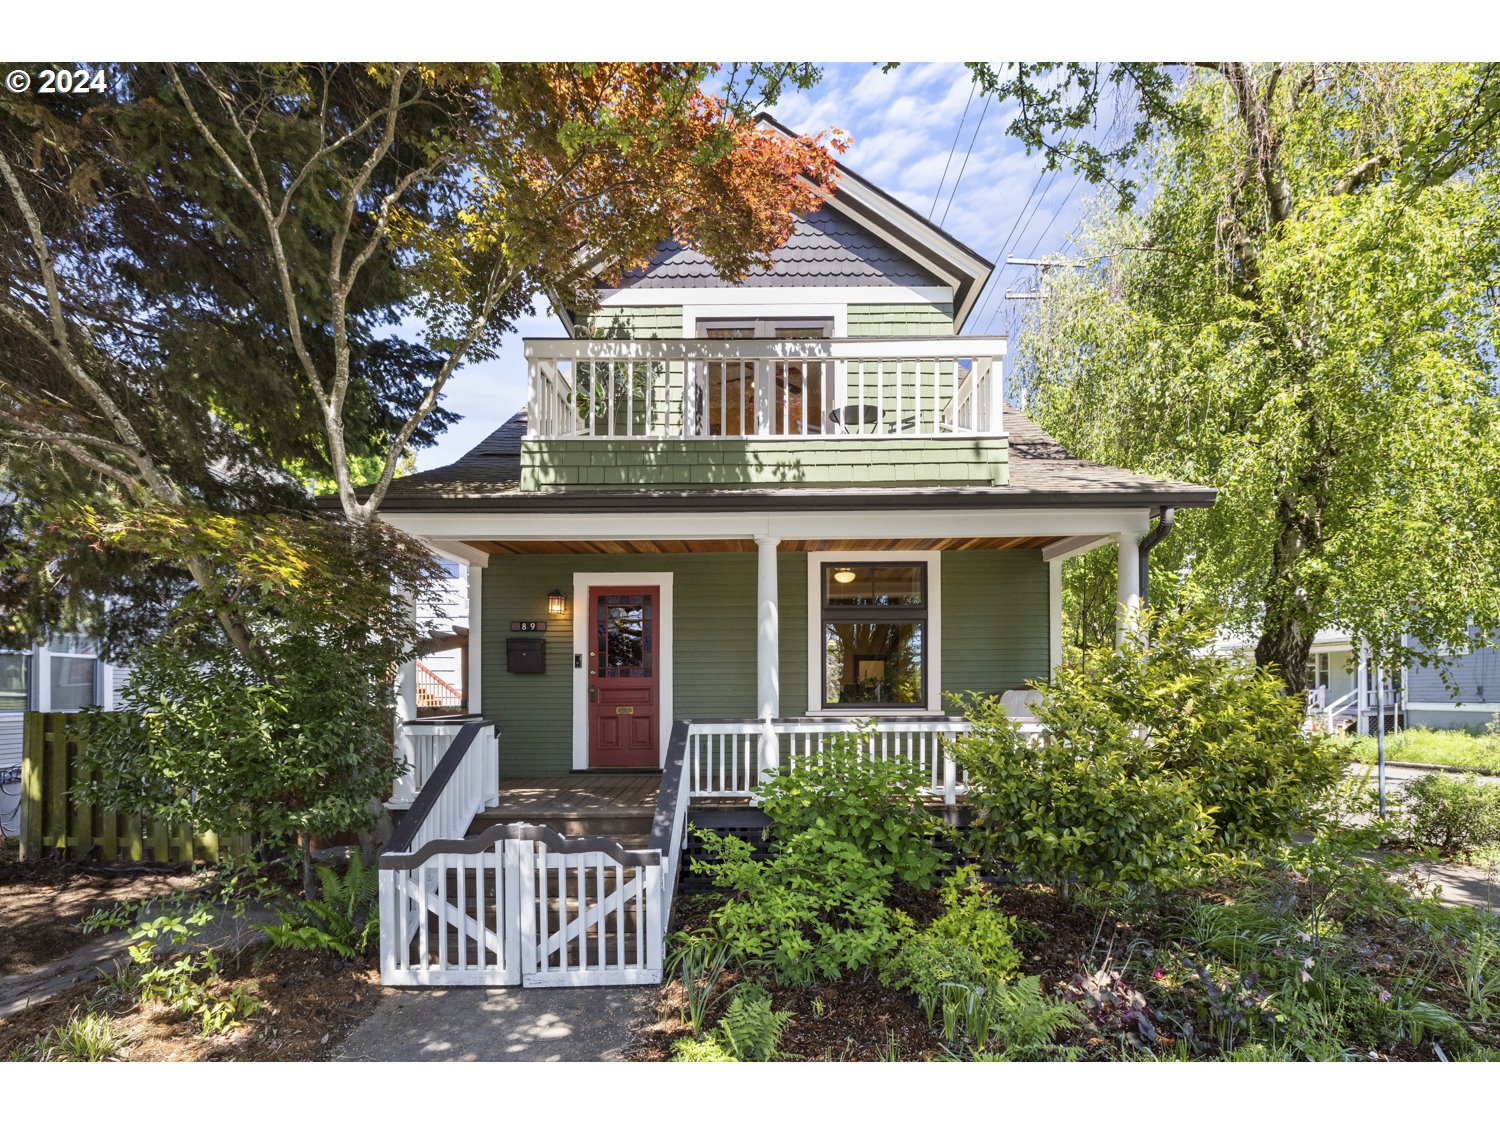 OPEN HOUSE: SATURDAY MAY, 11TH FROM 11AM - 1PM! Charming Craftsman Home with Modern Updates!! This beautifully updated Craftsman with 3 beds/2 baths and a bonus room in the basement seamlessly blends vintage charm with modern amenities. Original fir floors throughout, claw foot tub, stained glass front door, along with other architectural details add to its historic charm while abundant windows and high ceilings create a light, airy, and spacious feel.The large formal dining area and kitchen with a butler?s pass-through provide ample space for entertaining. Kitchen is updated with granite countertops and stainless steel appliances.Three sunny upstairs bedrooms share a full bath and a separate shower room?a unique and charming feature. The main bedroom opens to a private balcony, while the surrounding trees offer a sense of peace and privacy in the inner city.An expertly-waterproofed basement with new epoxy floors is the perfect flex space for a yoga room, home gym, art studio, or private office. The house is outfitted with seismic retrofitting, some new siding, insulation, and exterior paint by SFW Construction, new roof by HER Roofing, and new electrical panel and whole house surge protector by All Pro Electric. New tankless water heater, new AC, smart thermostat, insulated attic, and new insulated windows provide an energy efficient and comfort-first space.Just a few blocks to New Seasons, plus some of Portland?s most popular shops, restaurants, music venues, and eateries, this newly-updated, vintage home is a gem to be discovered!